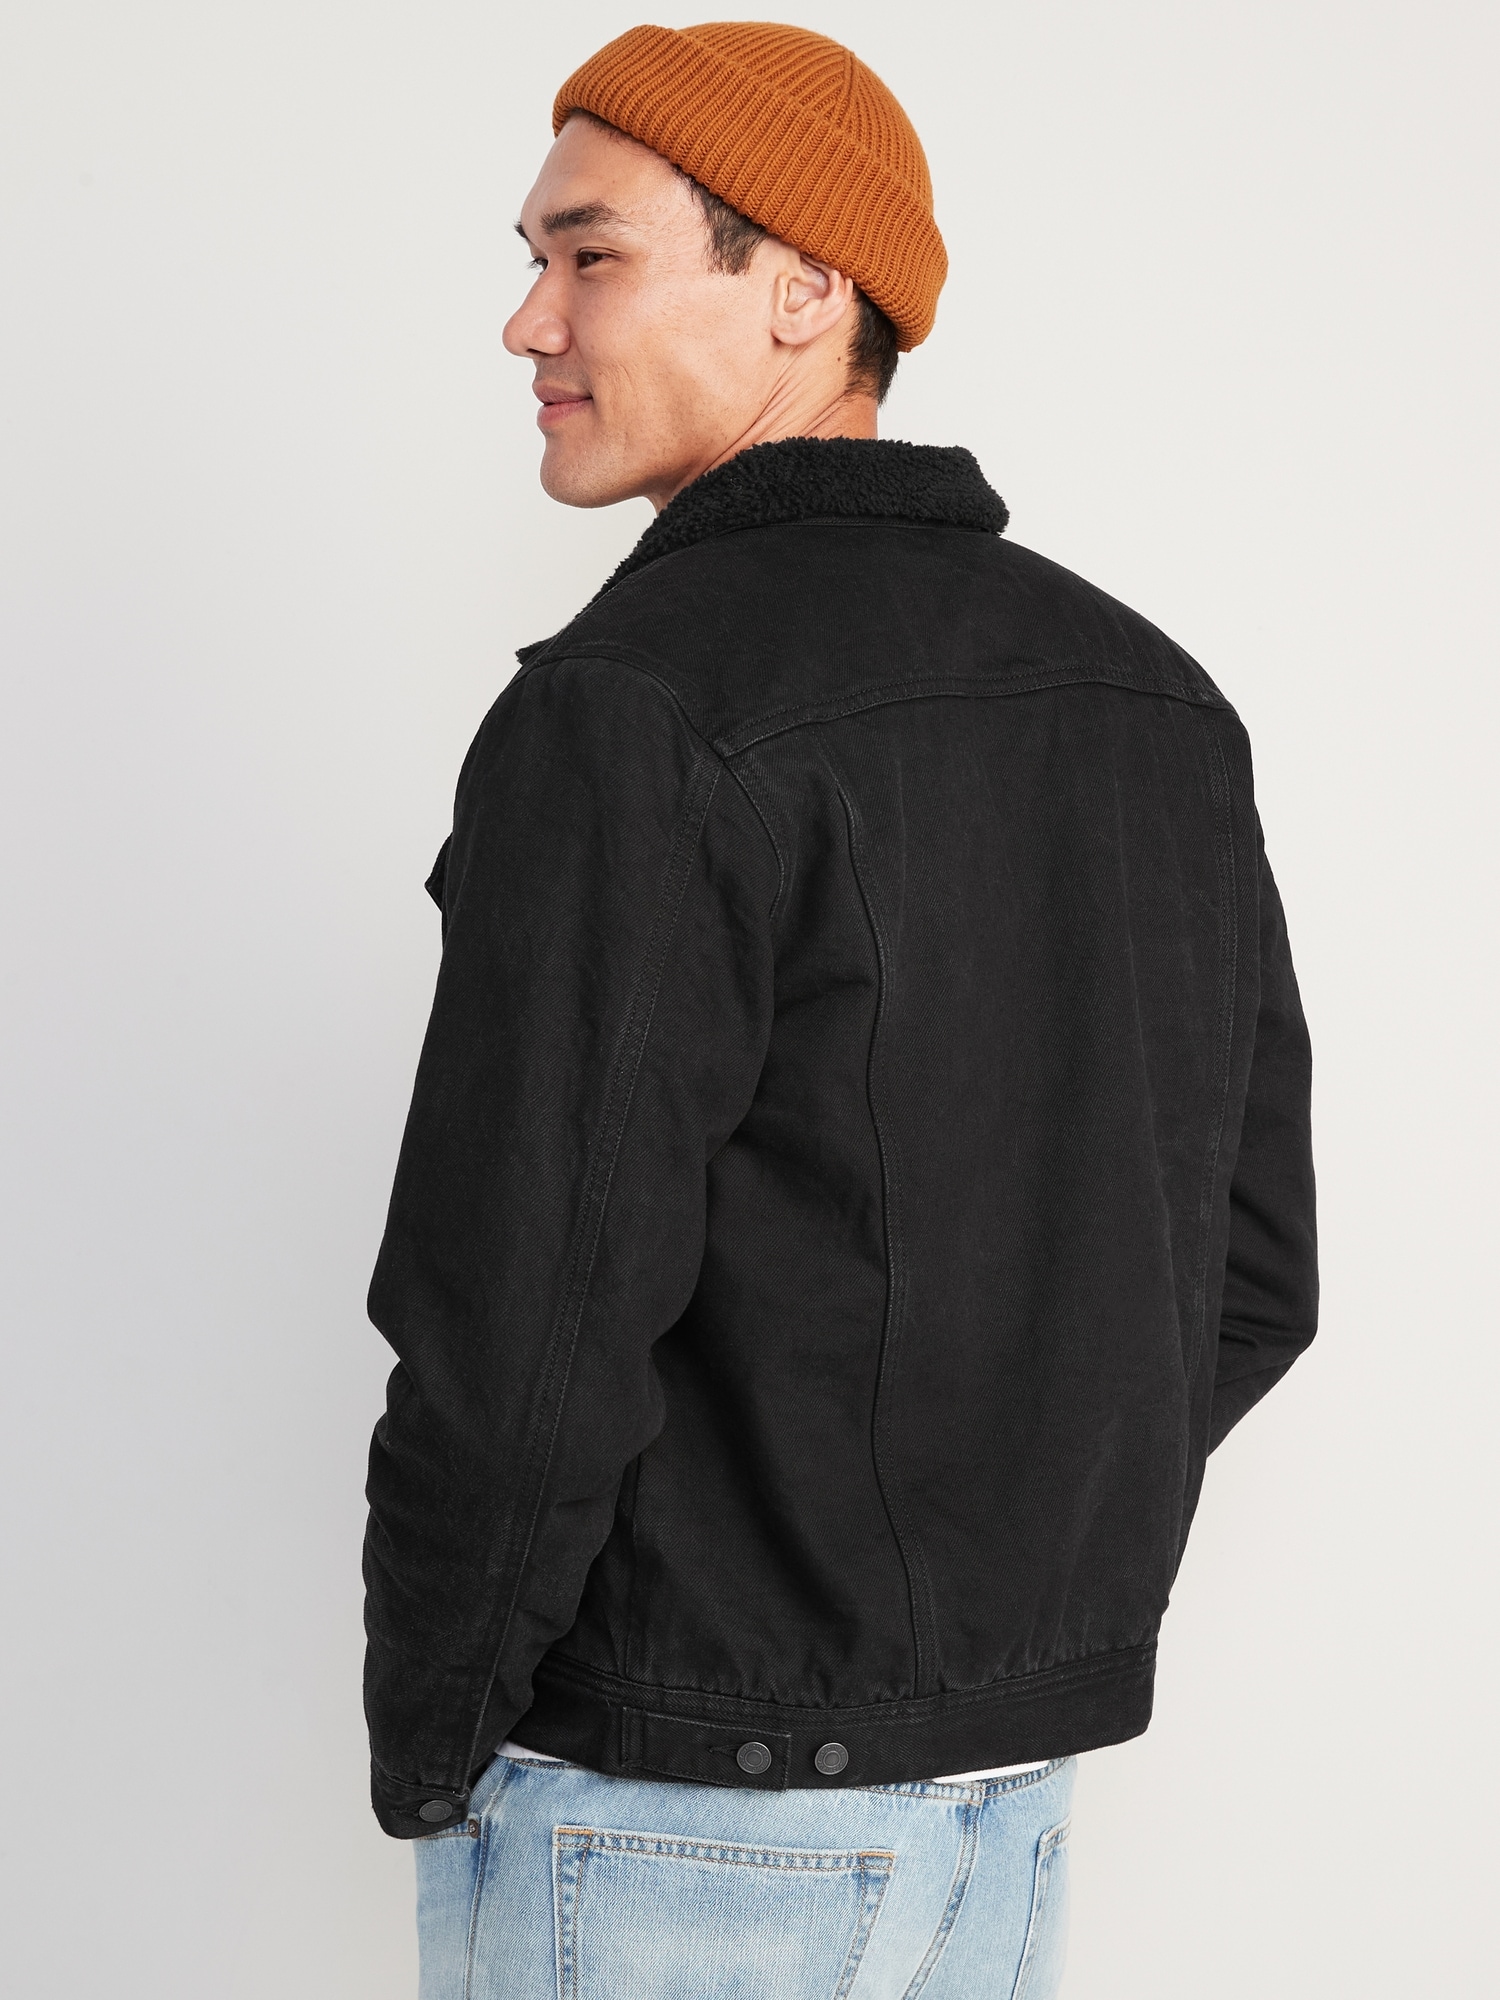 Sherpa-Lined Non-Stretch Black Jean Jacket | Old Navy